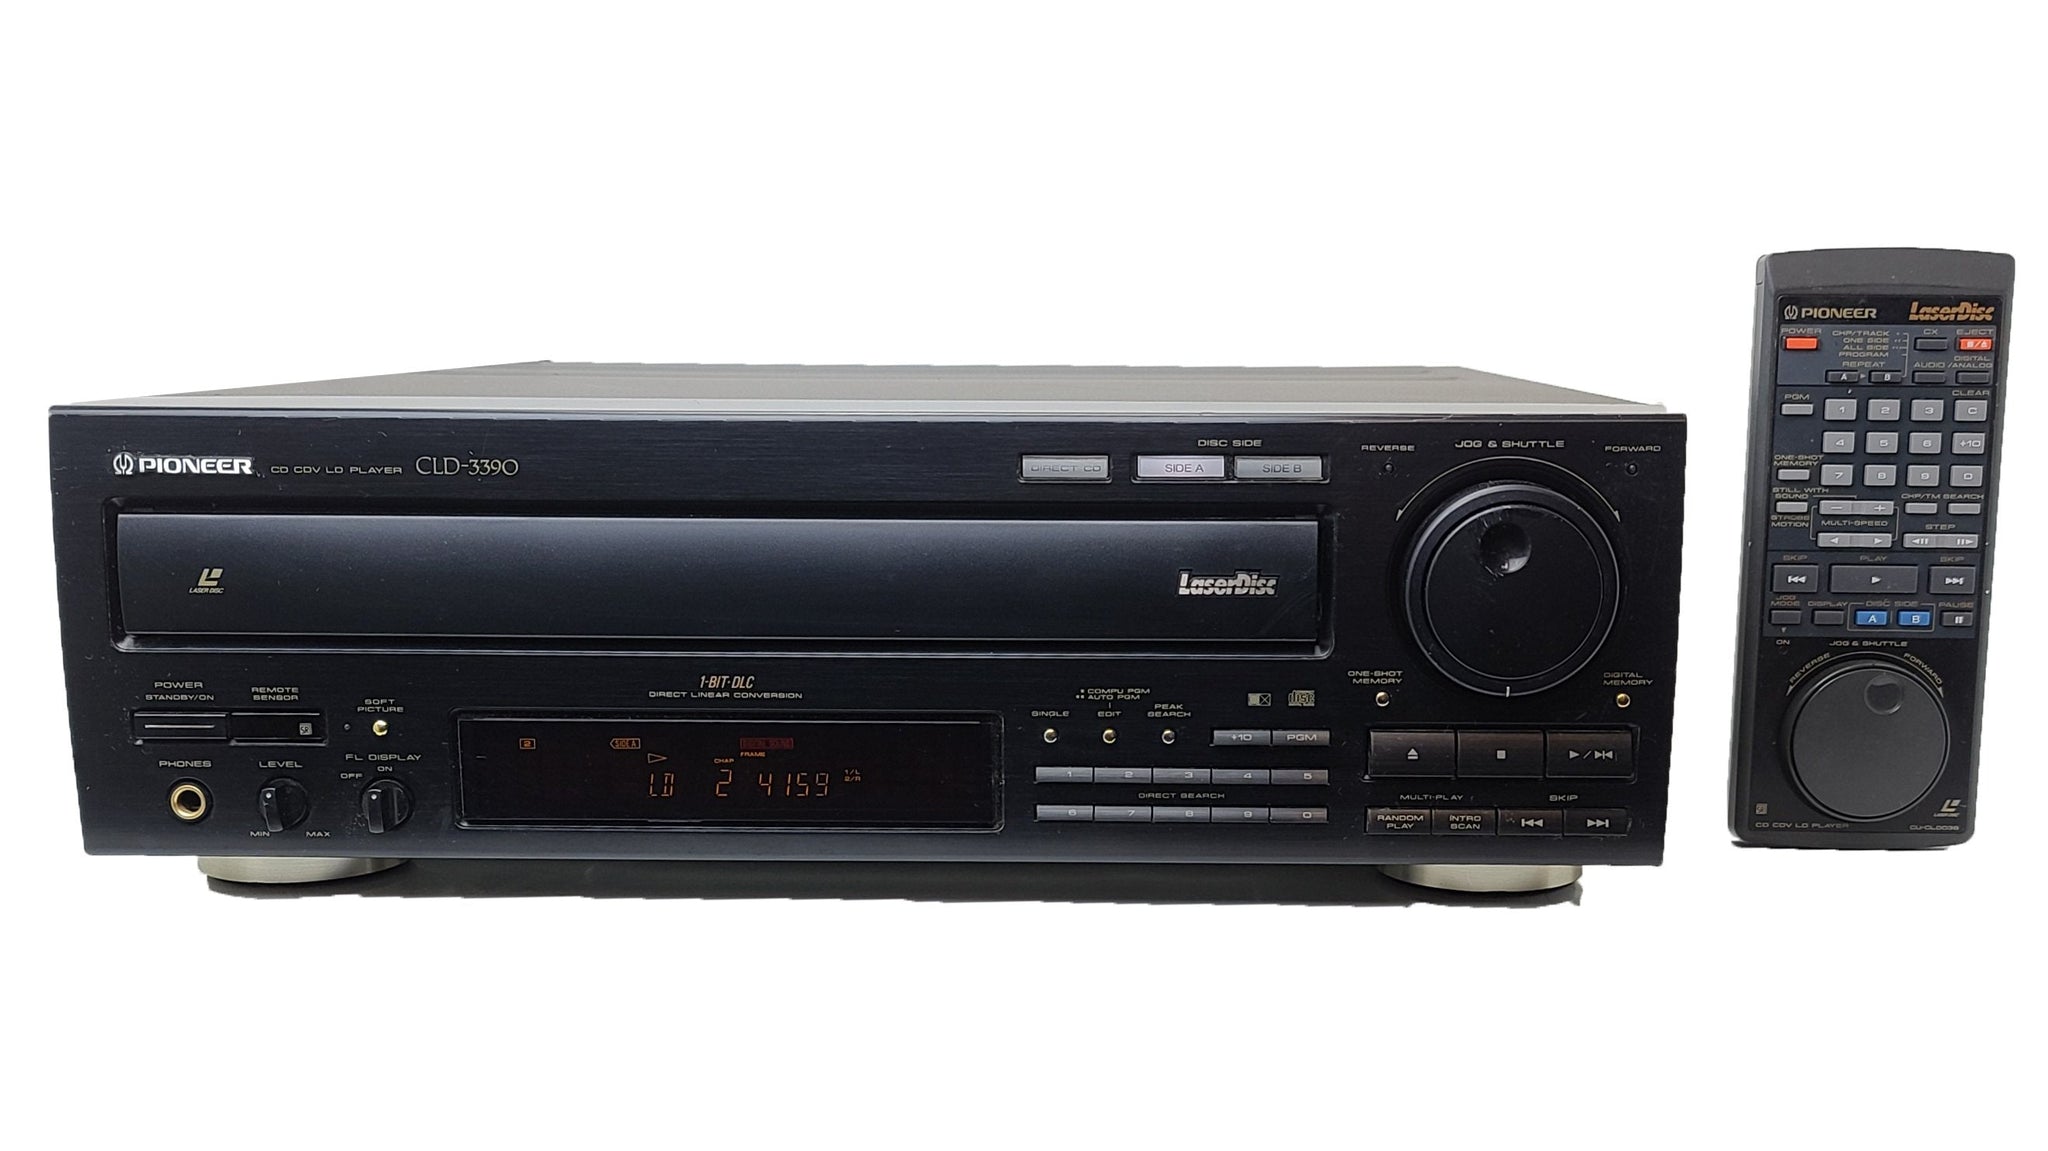 Pioneer CLD-3390 LaserDisc CD CDV LD Player with Both Side 